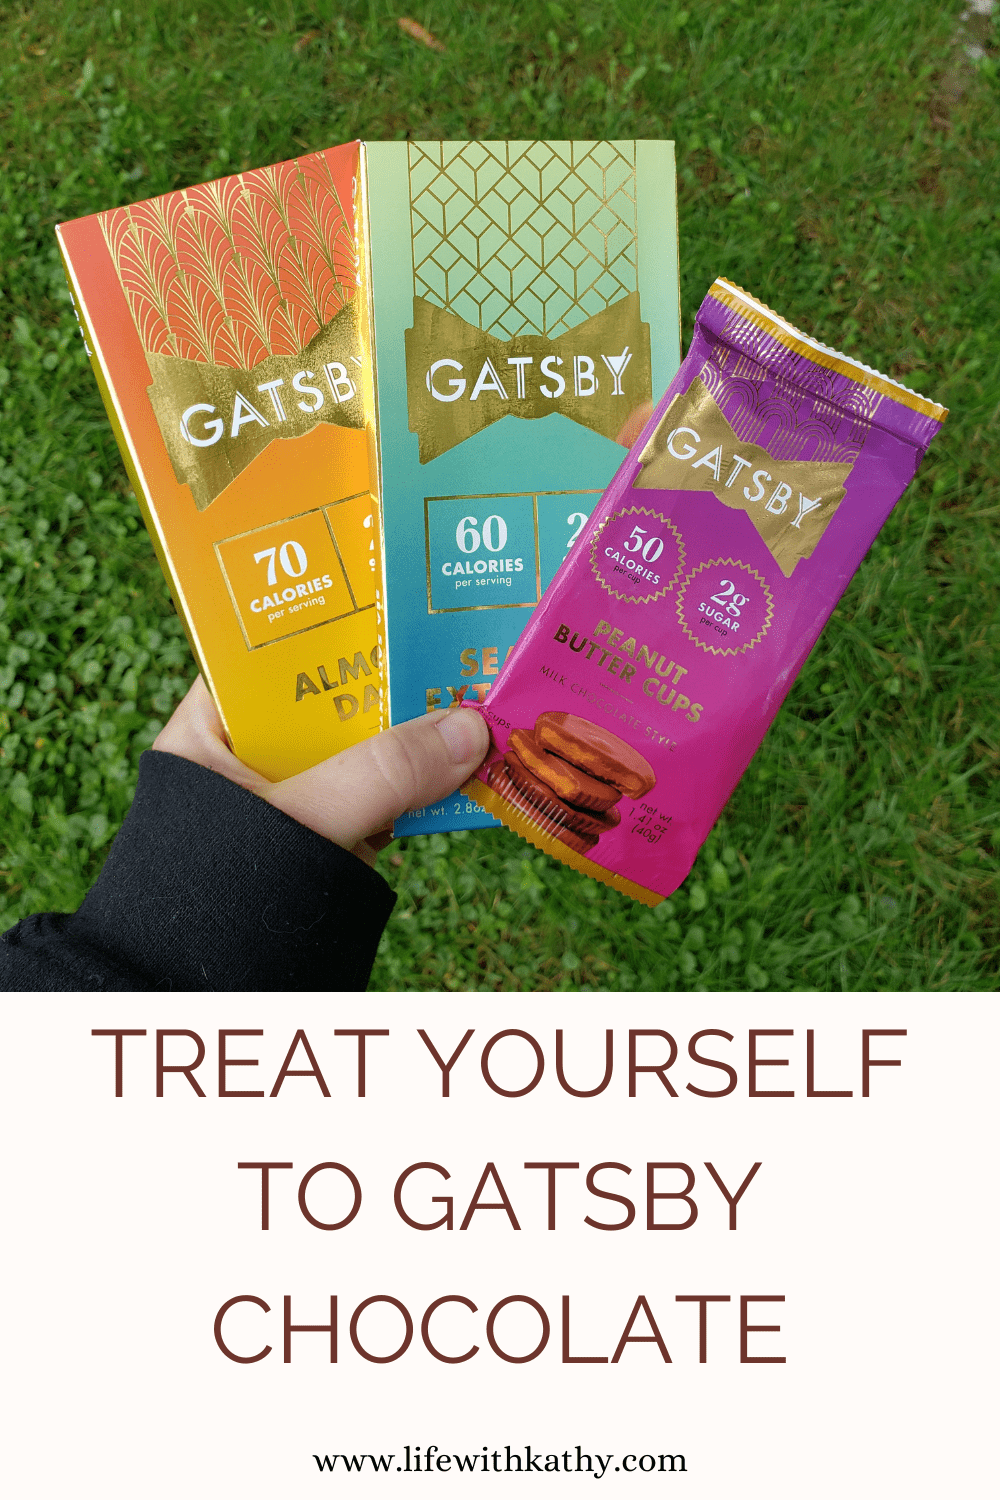 Meet GATSBY, Low Calorie Chocolate That Tastes Delicious!